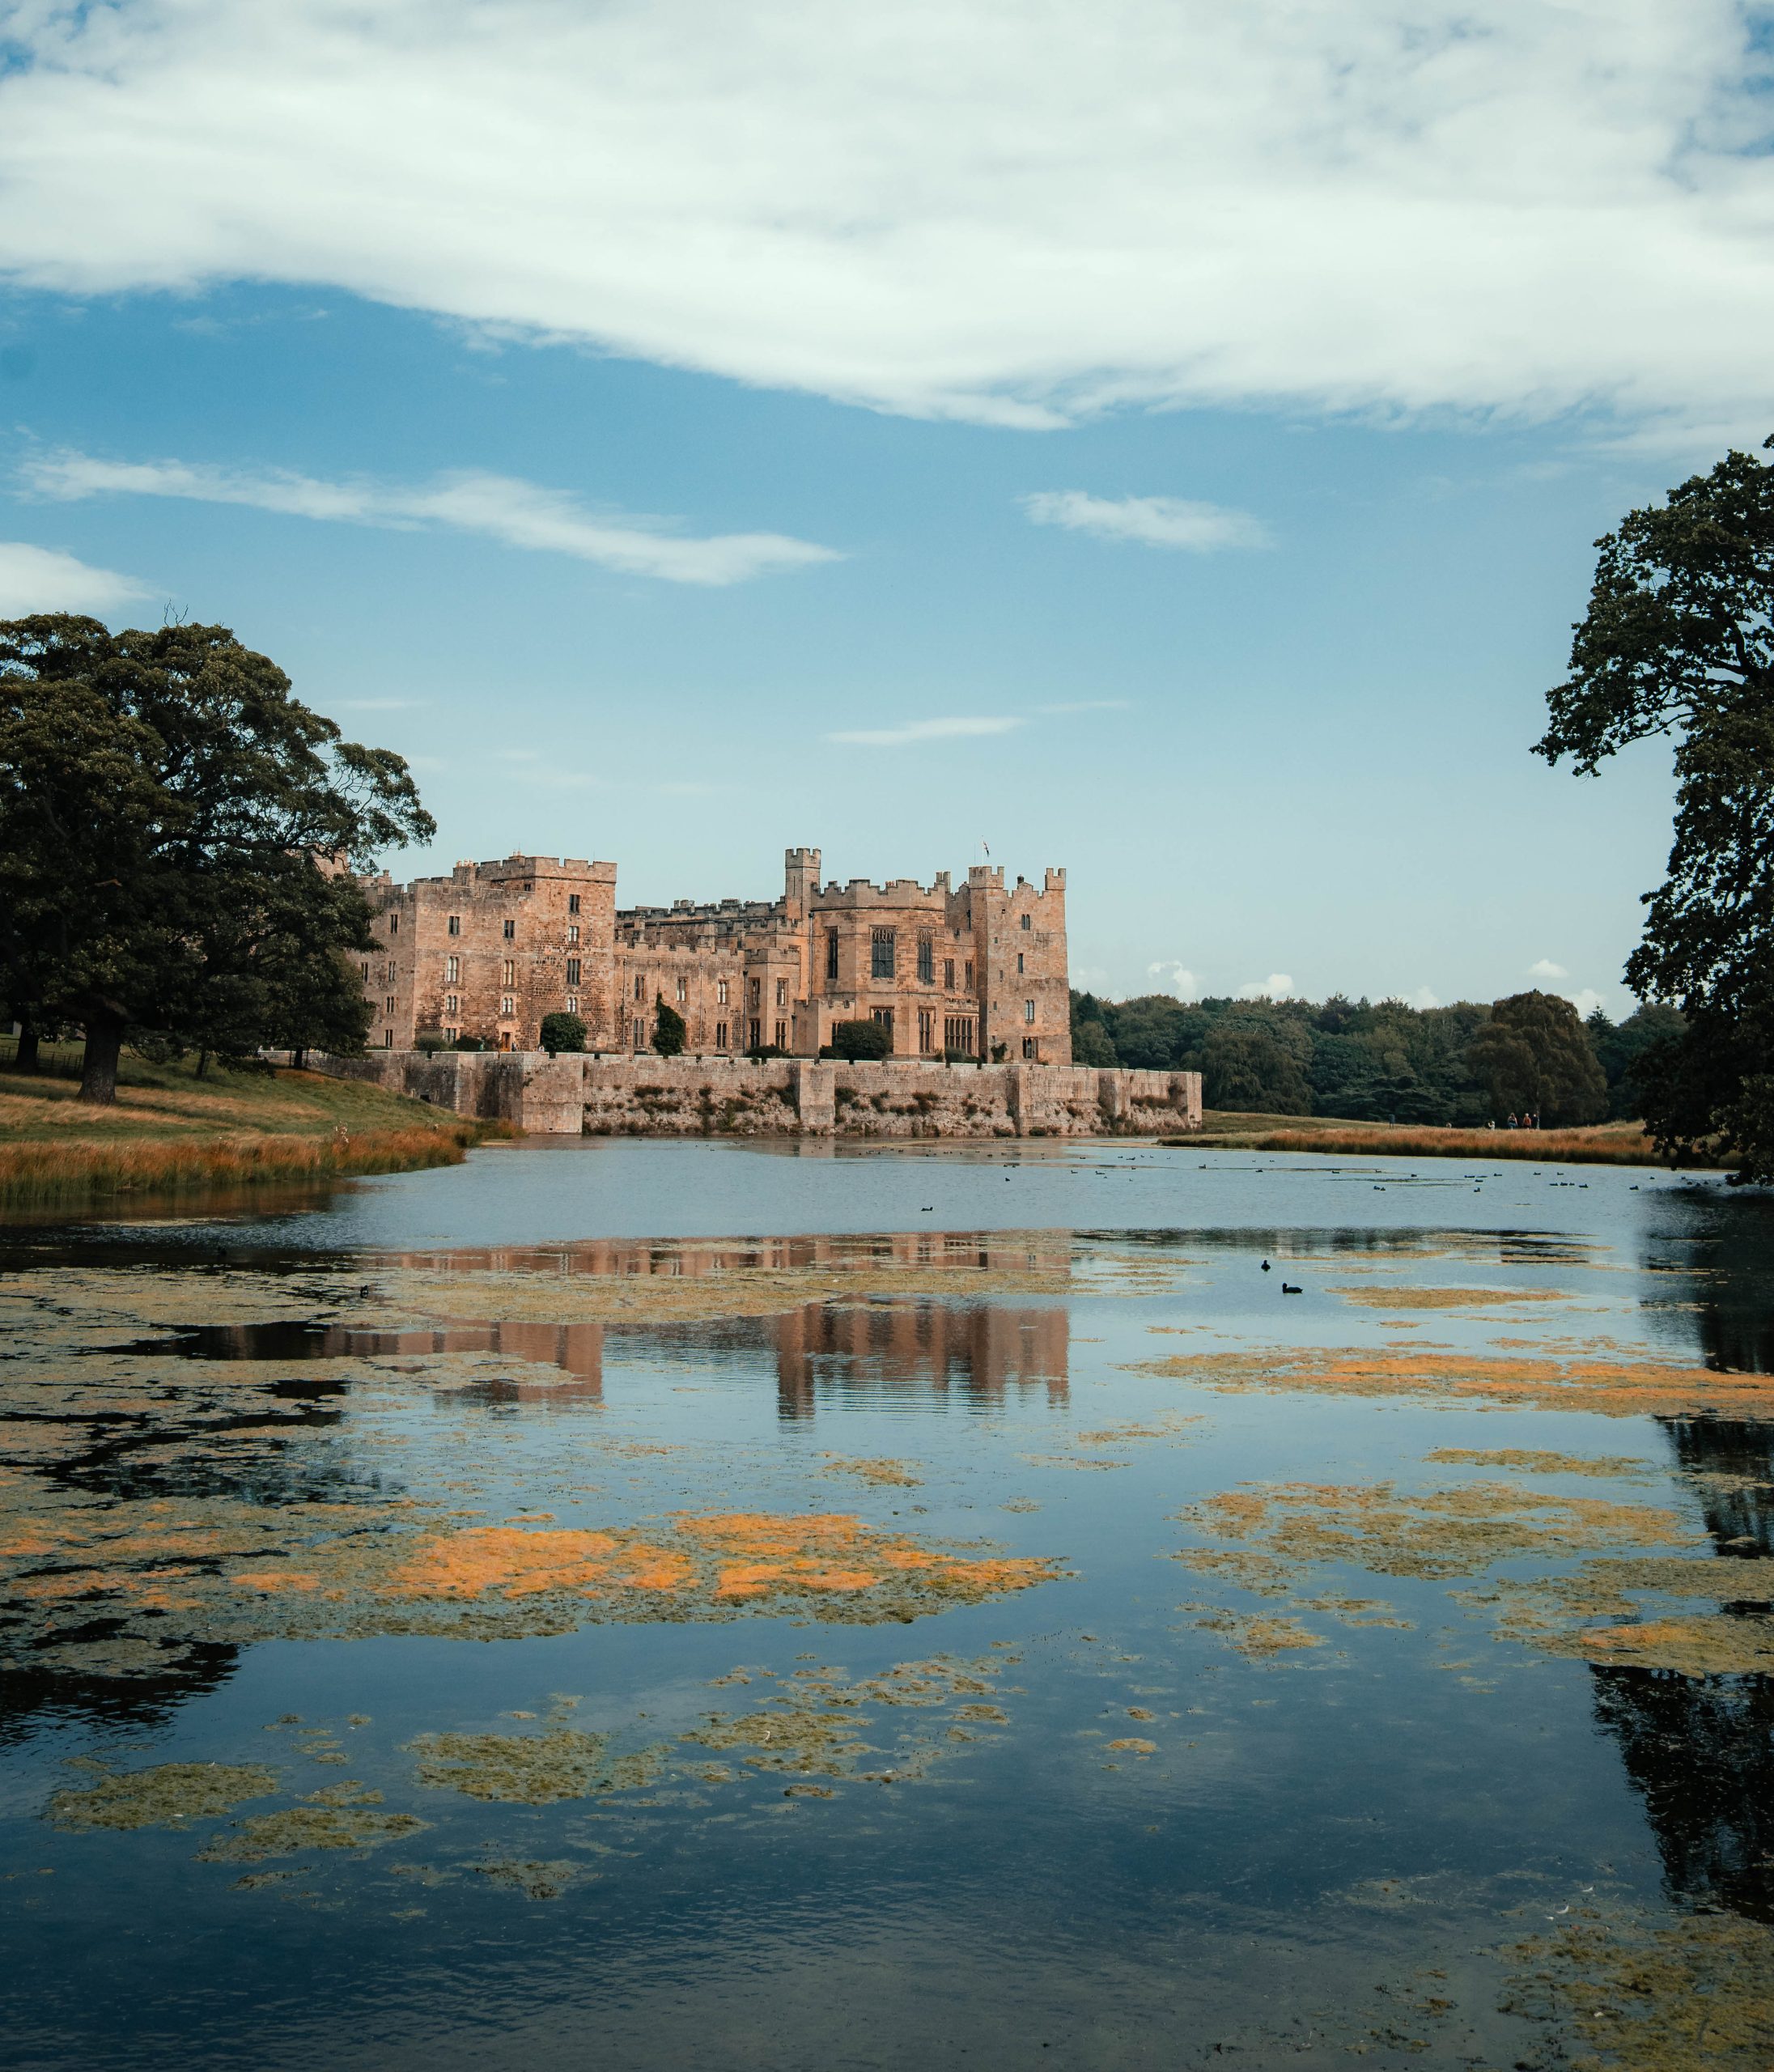 Image of Raby Castle surrounded by water and countryside at sunset